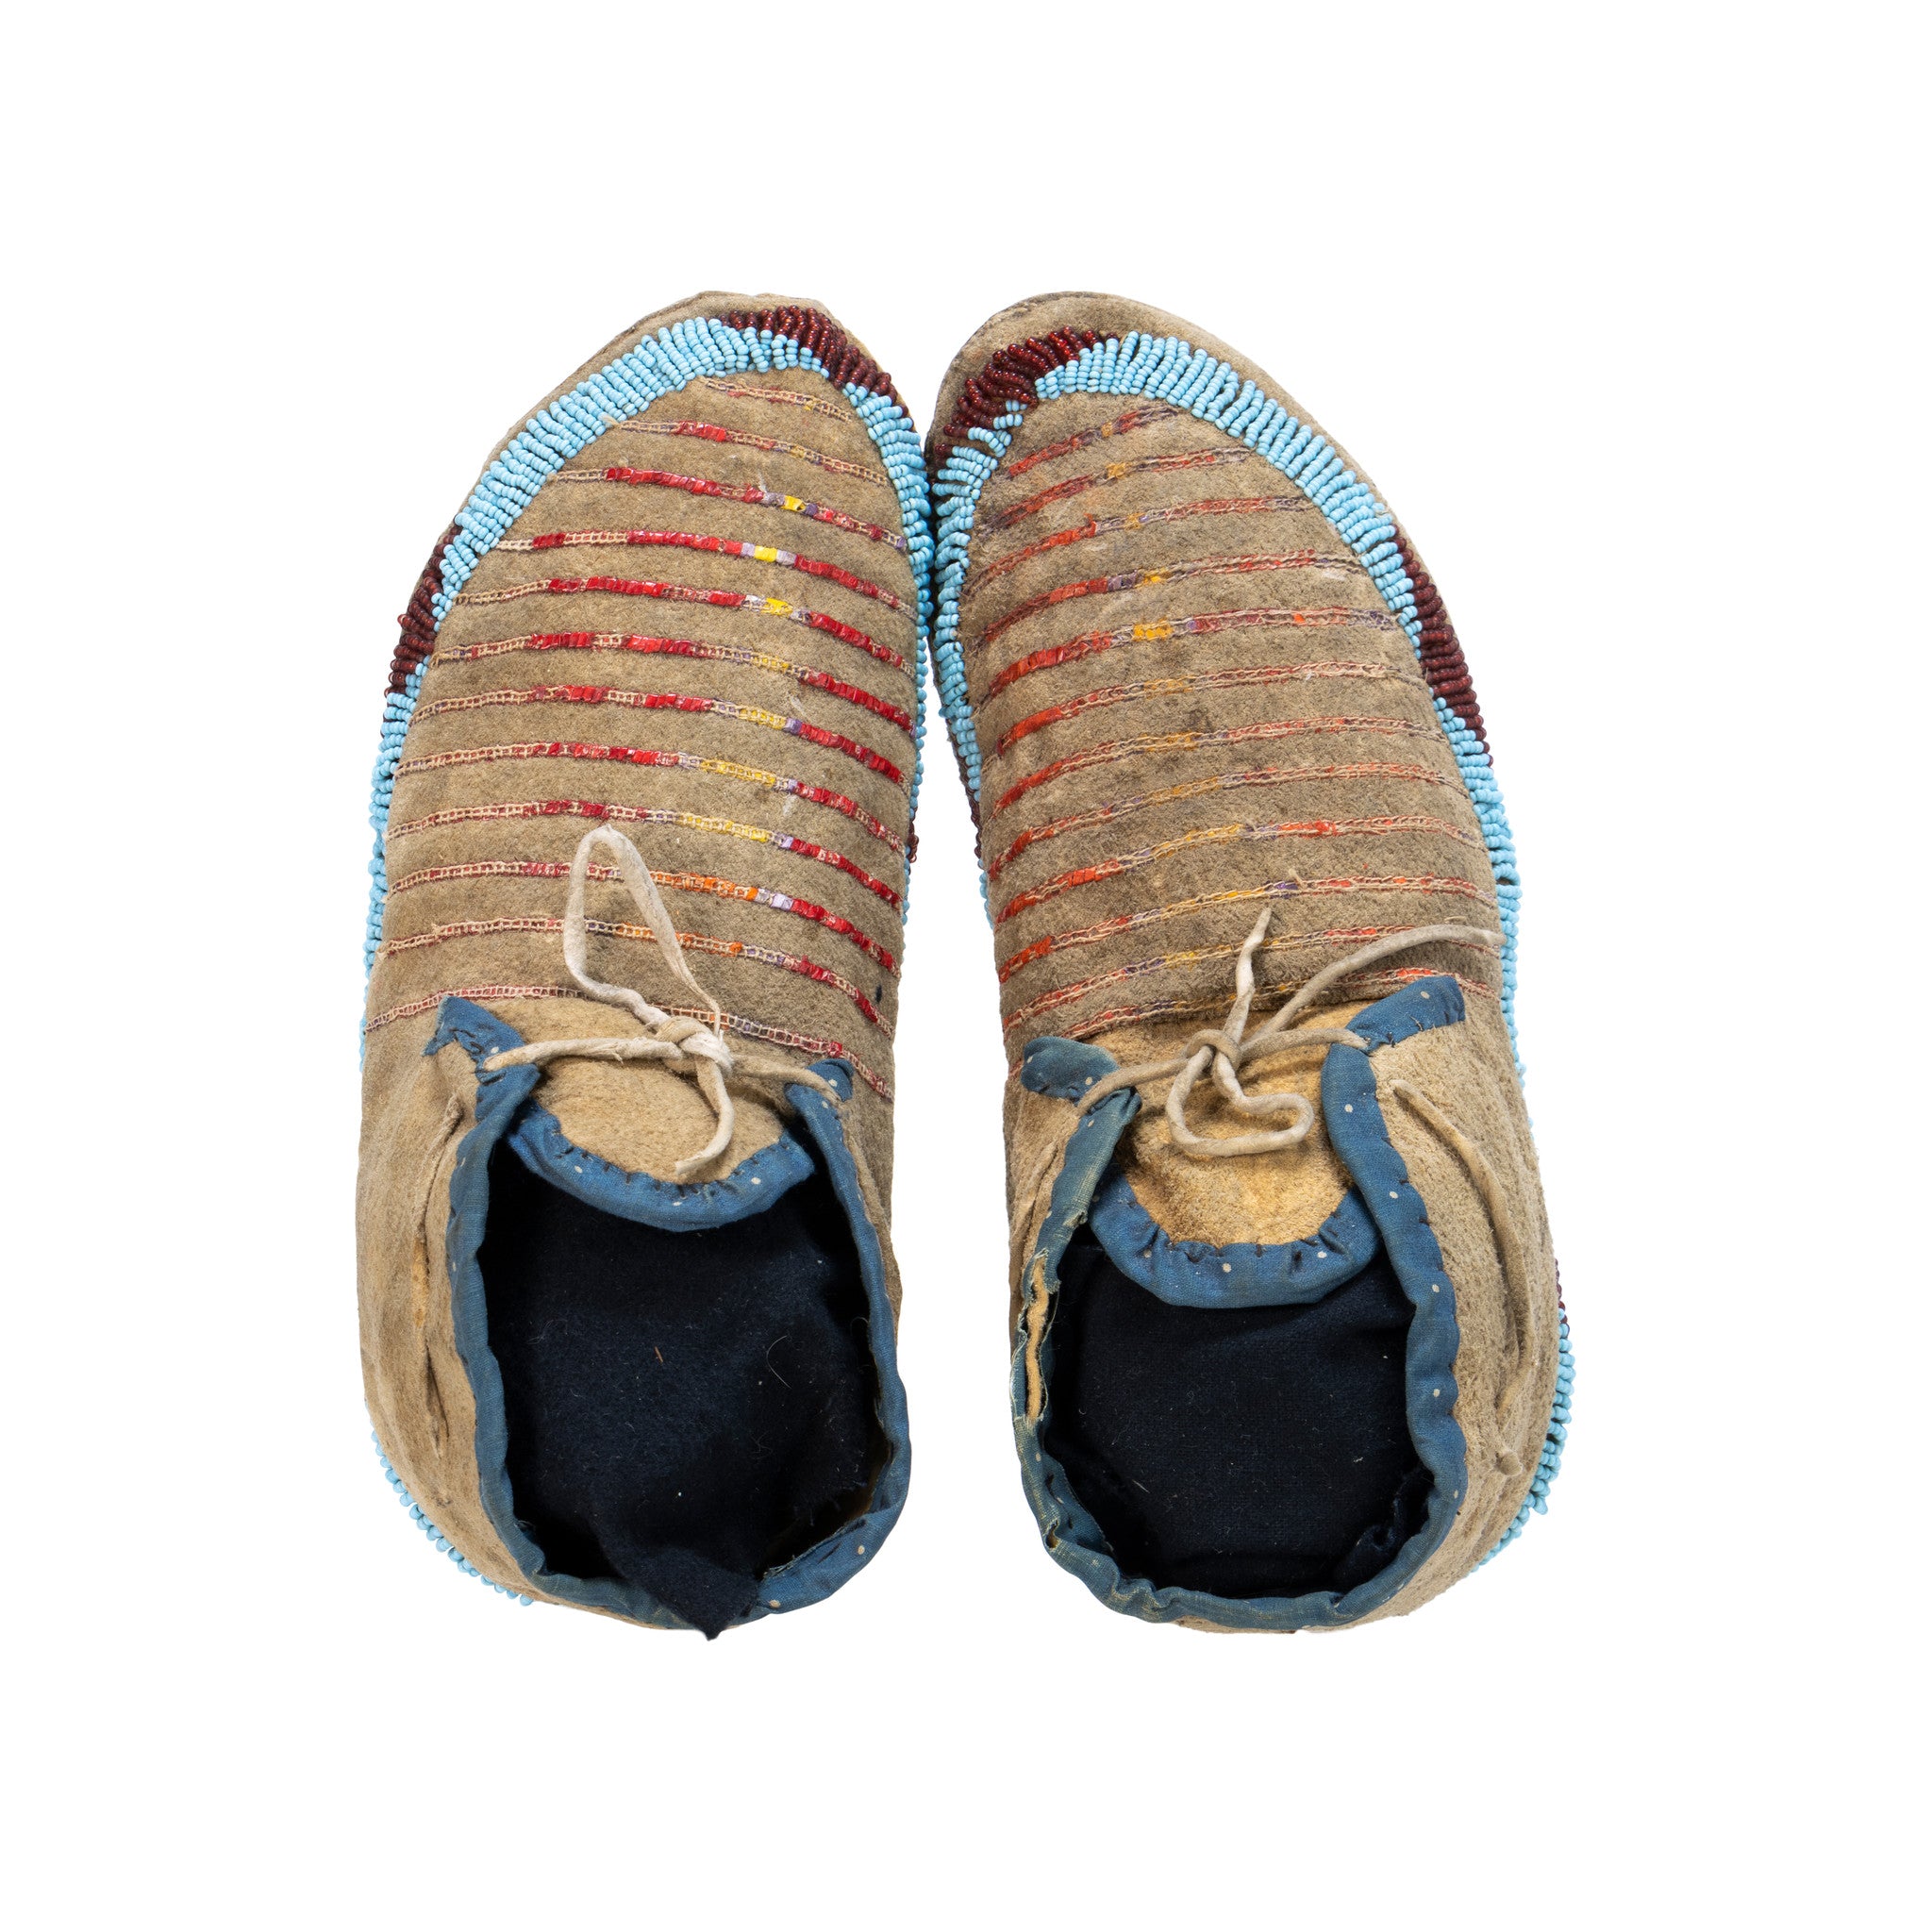 Sioux Quilled Moccasins